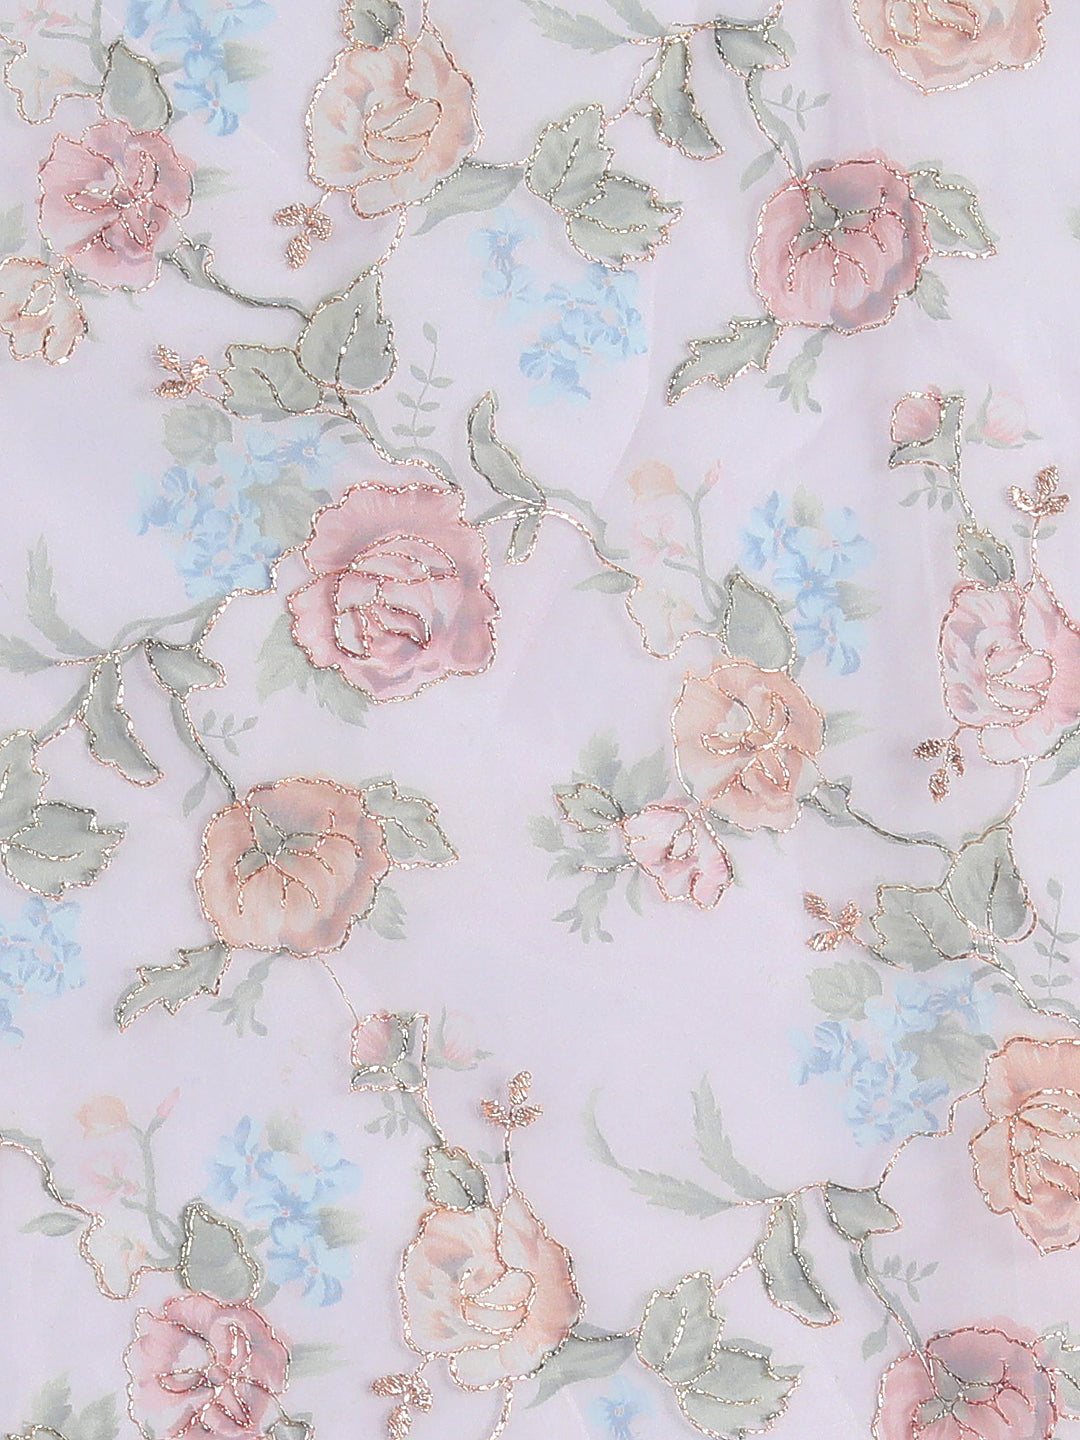 Blue and Pink Floral Fabric